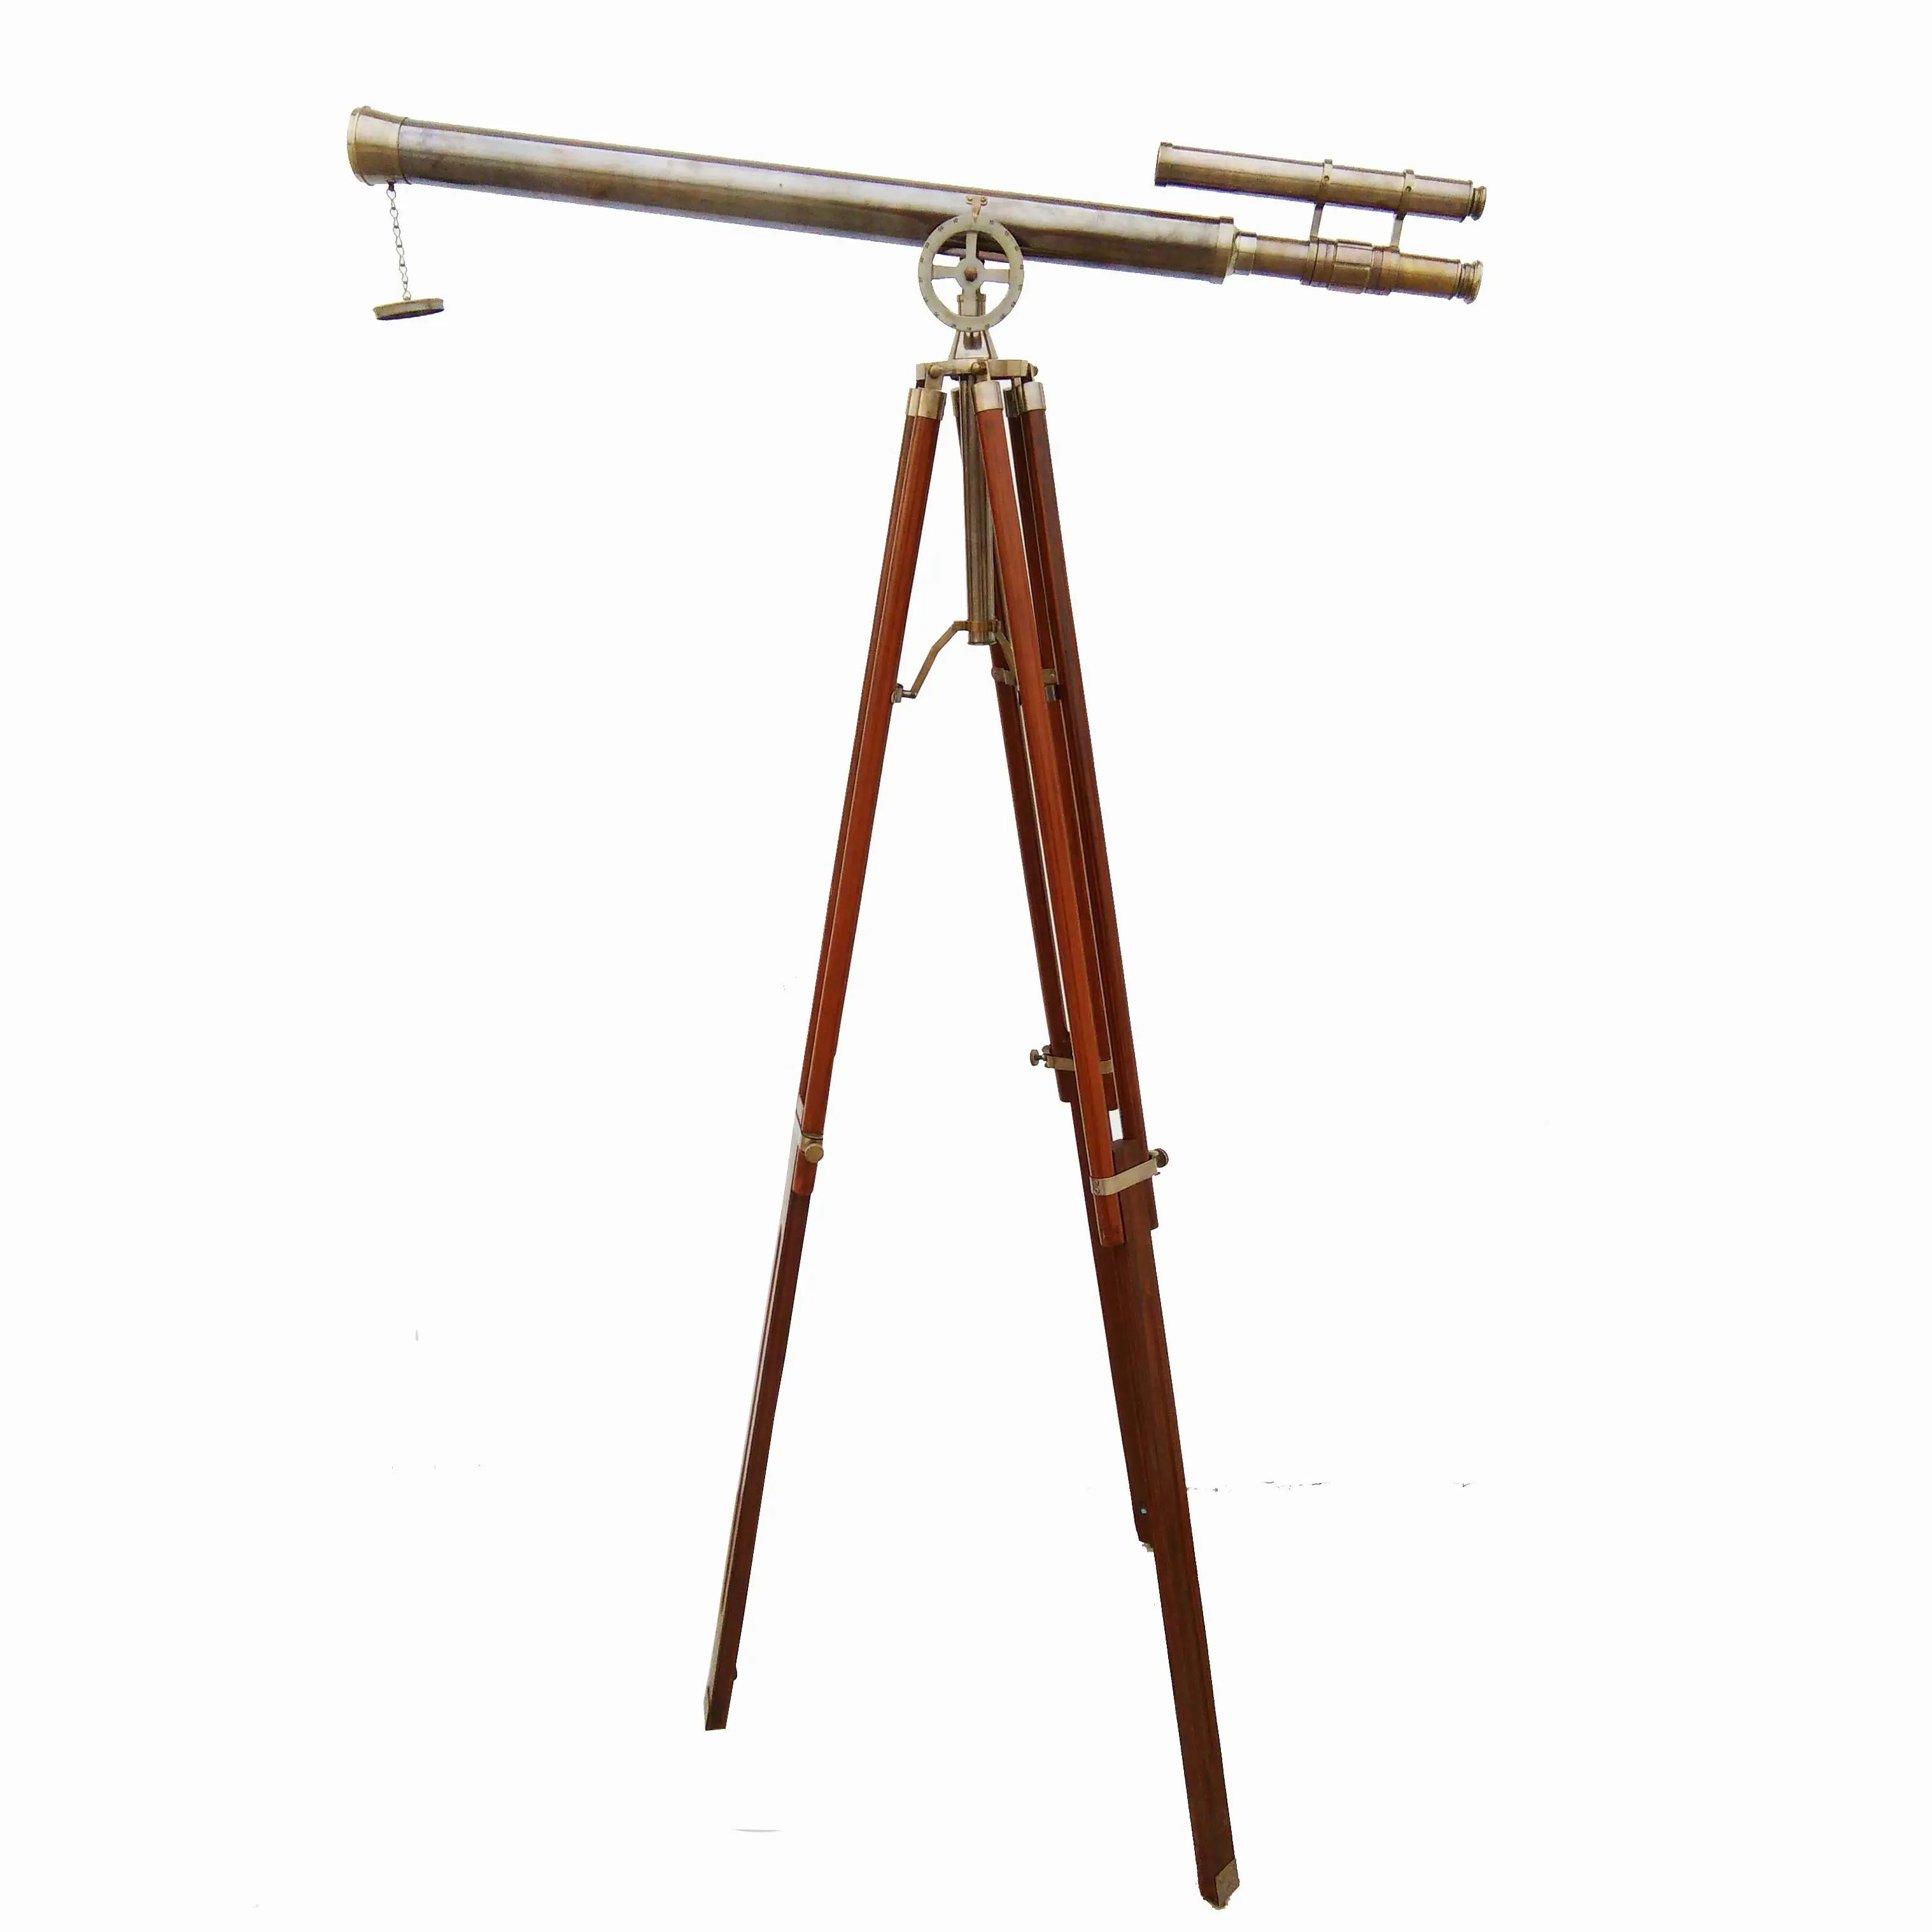 Nautical Vintage Brass Double Barrel Tripod Telescope with Wooden Stand Astro Telescope With Natural Wooden Tripod